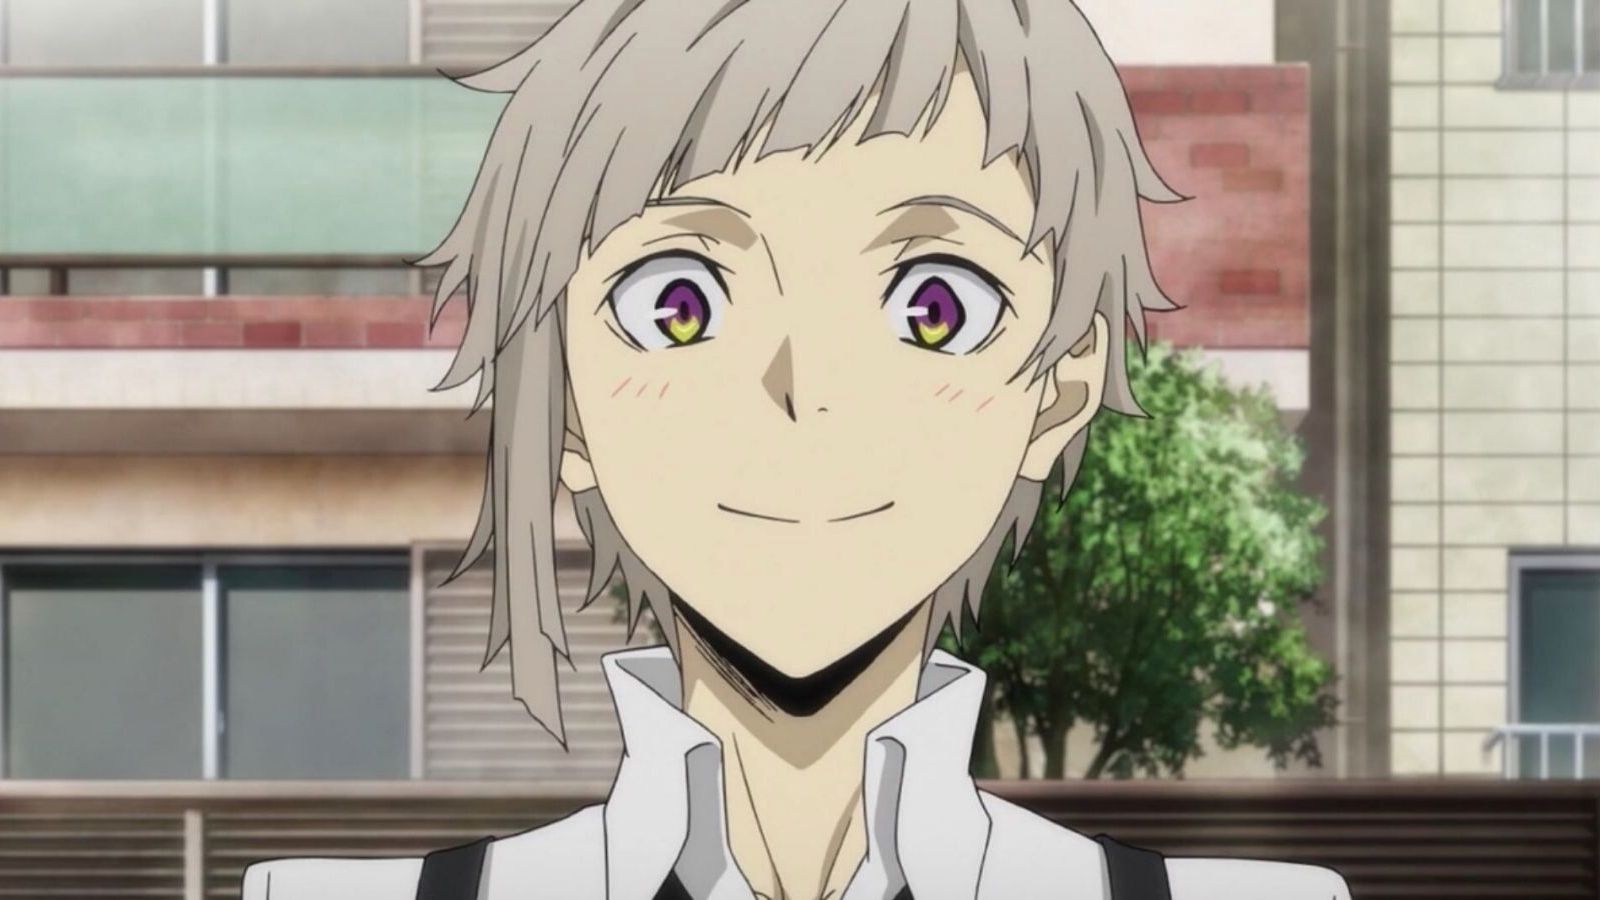 Bungo Stray Dogs: 10 Facts You Didn't Know About Atsushi Nakajima